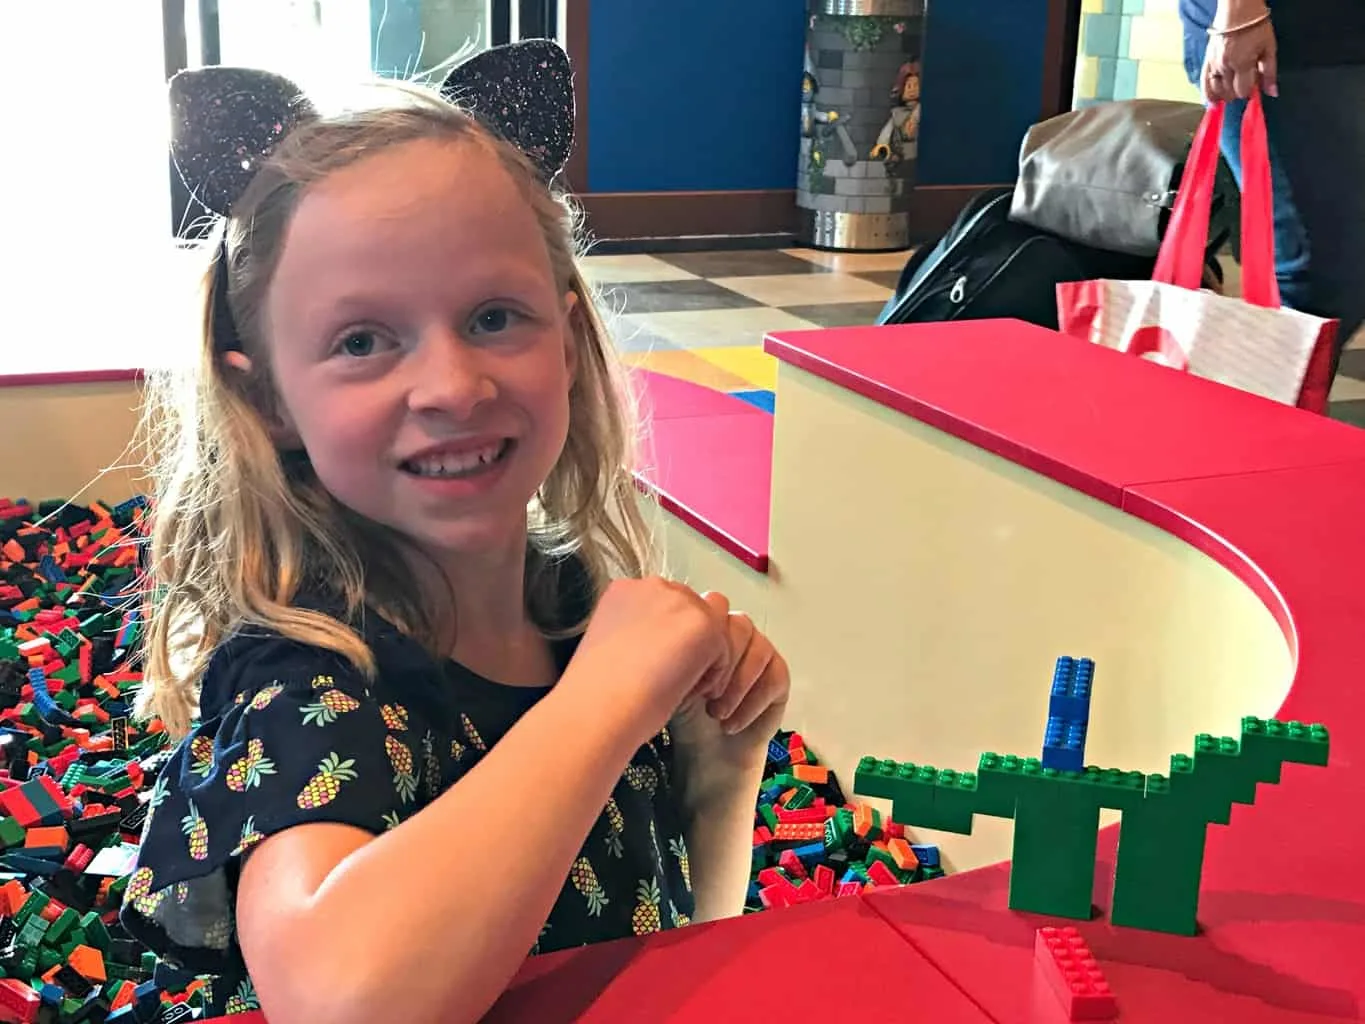 Girl playing with legos at LEGOLAND Castle Hotel